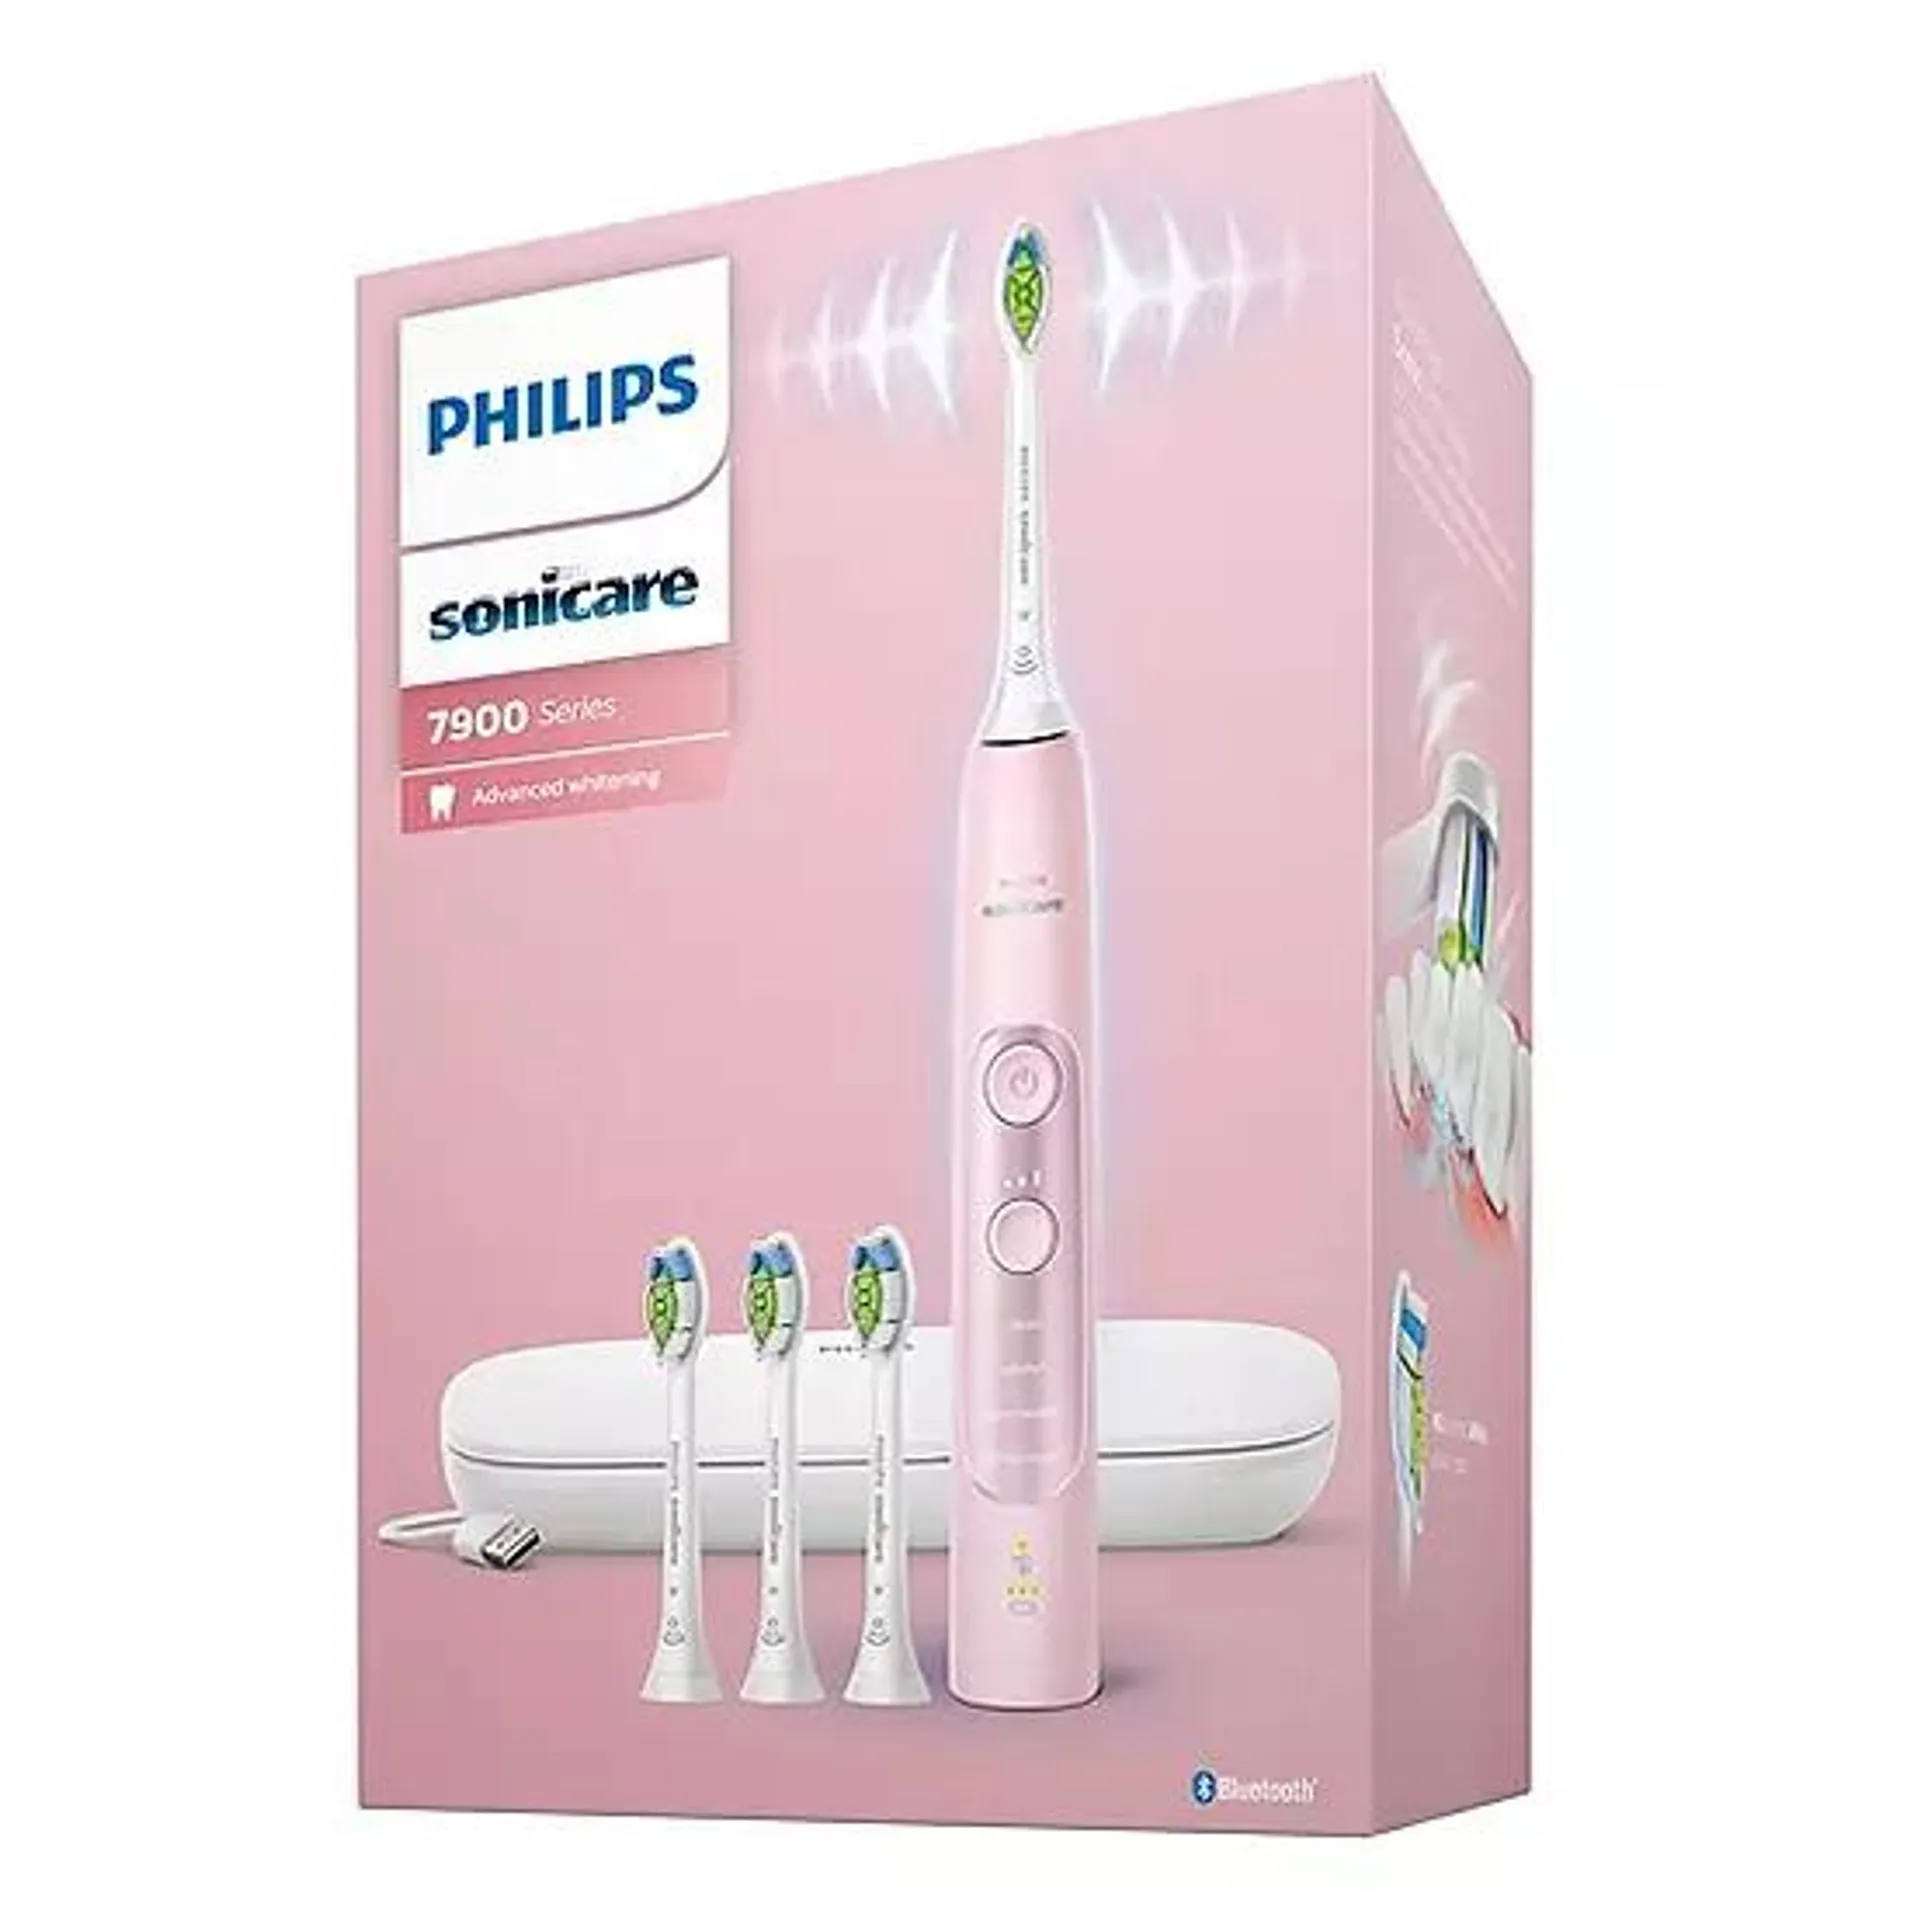 Philips Sonicare Series 7900 Advanced Whitening Toothbrush- Pink